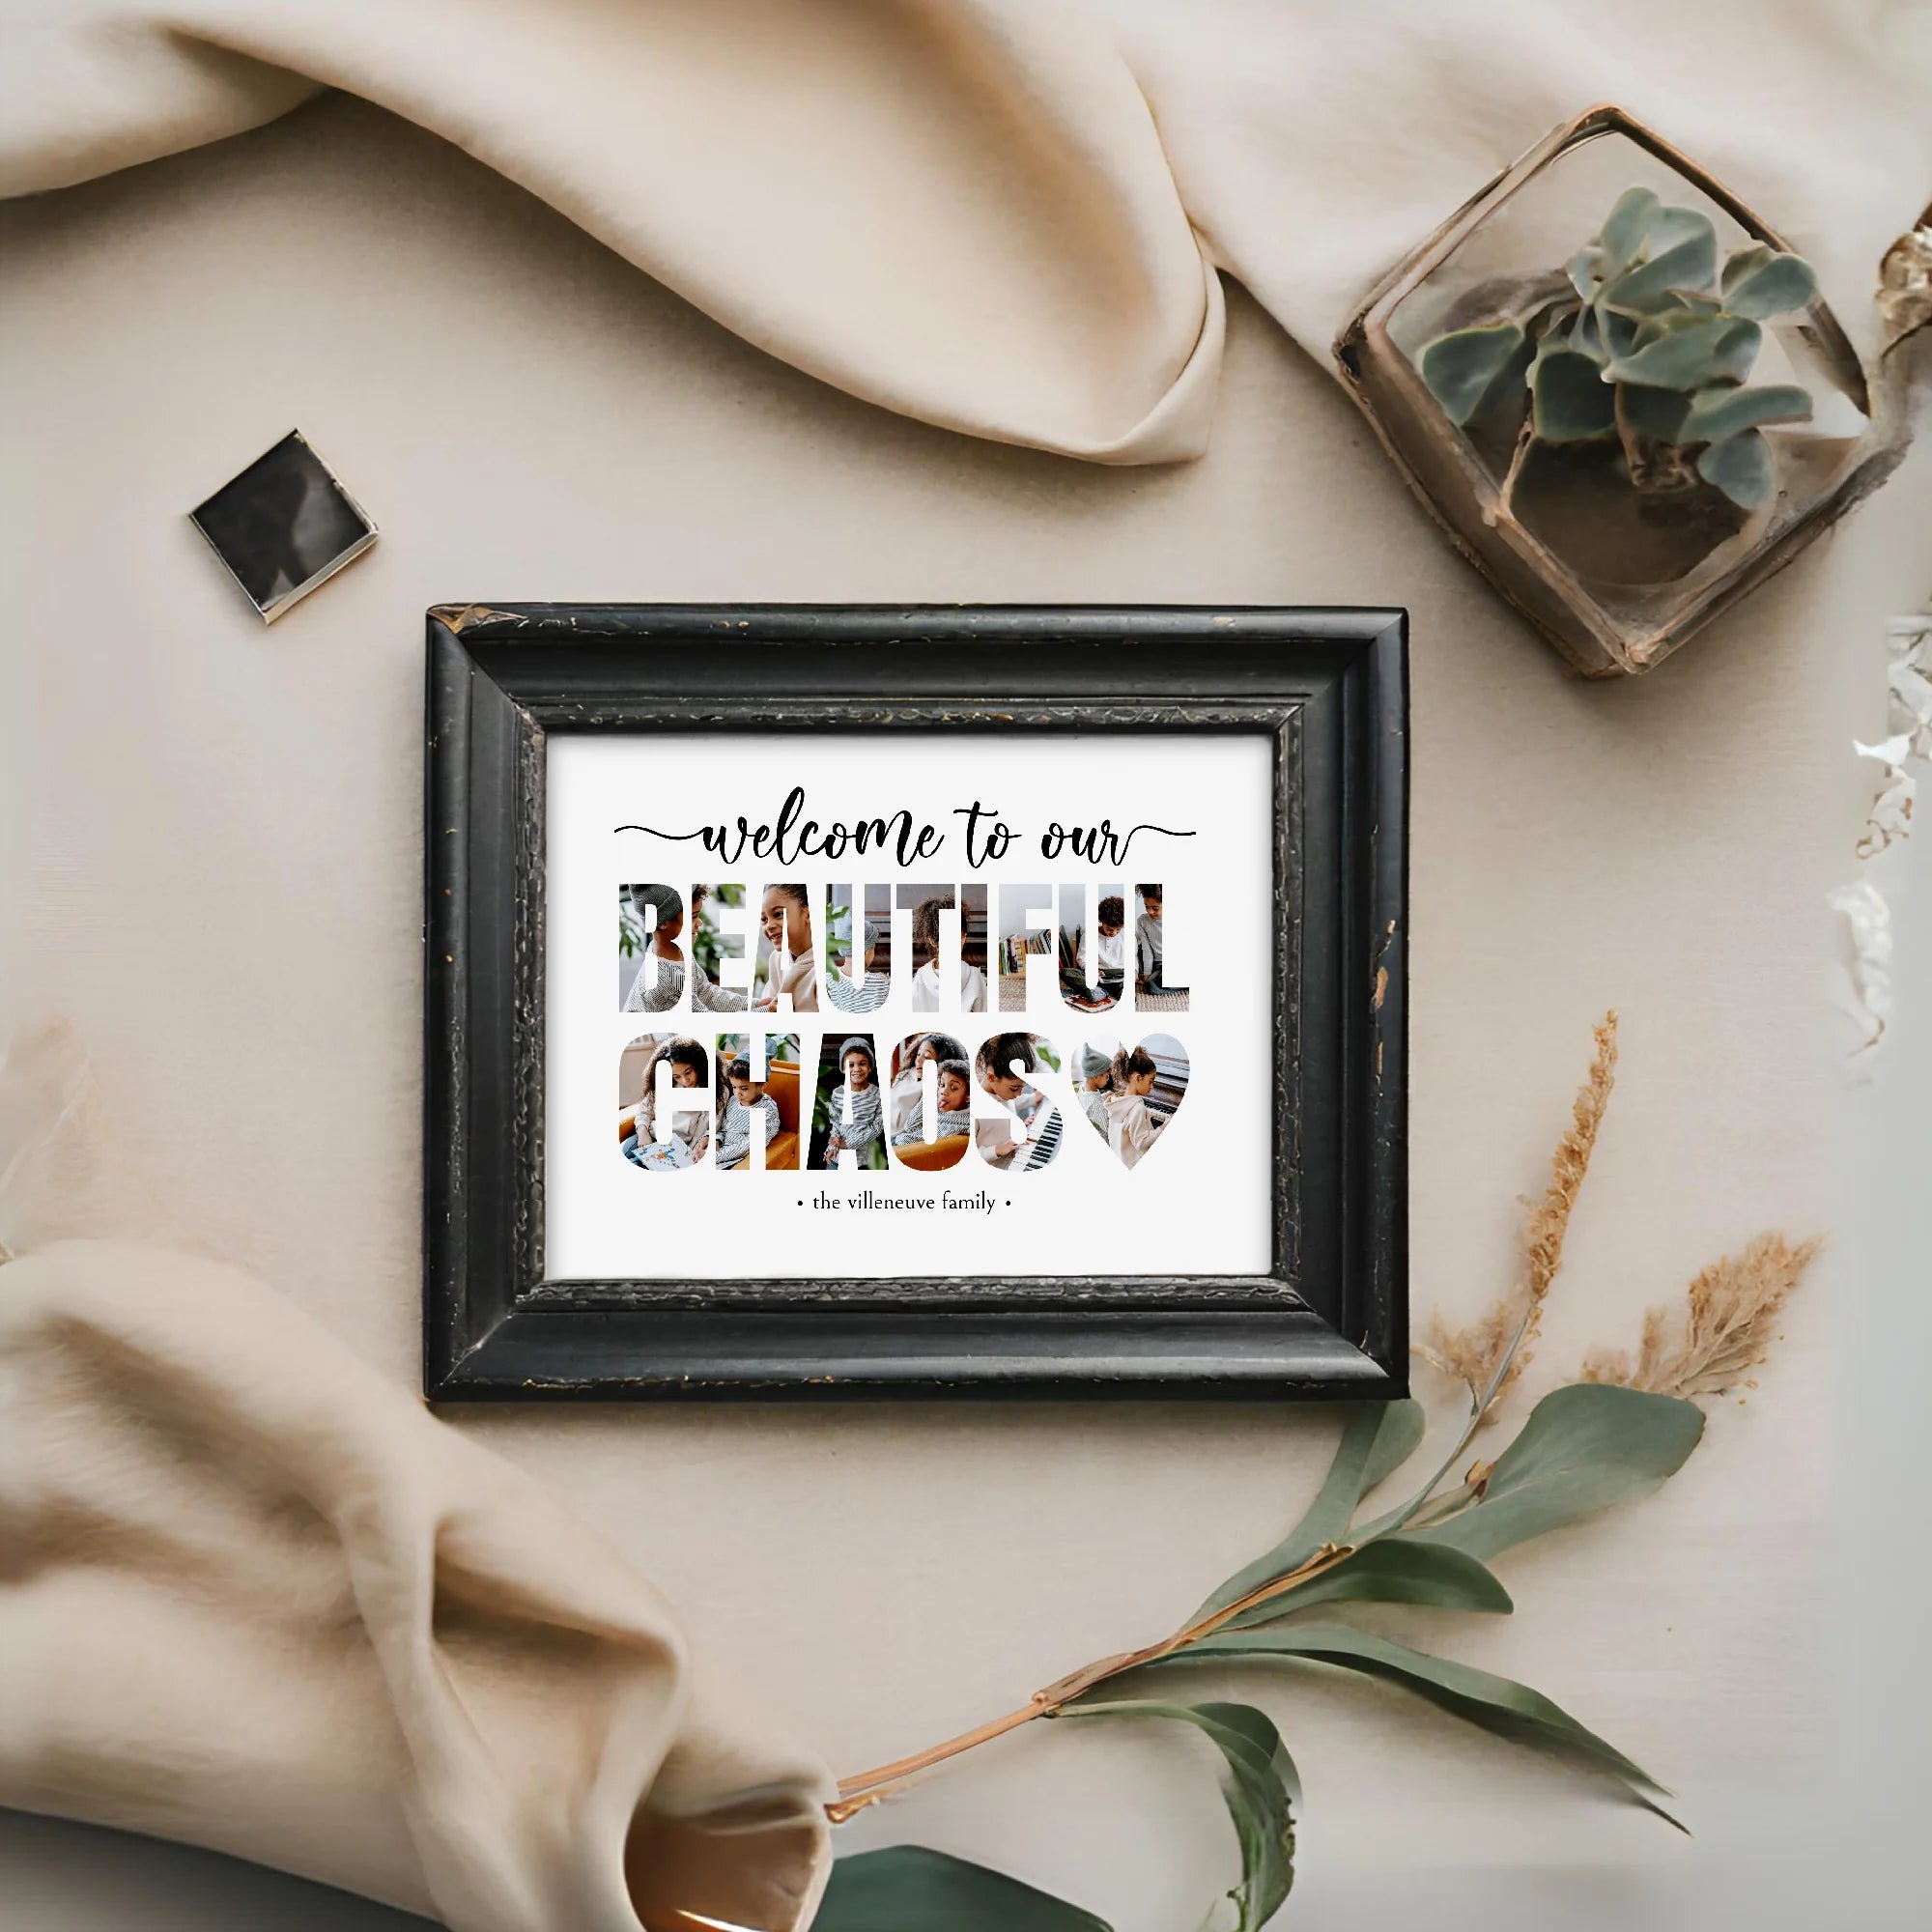 Editable Our Beautiful Chaos Photo Collage Template Personalized Gift by Playful Pixie Studio